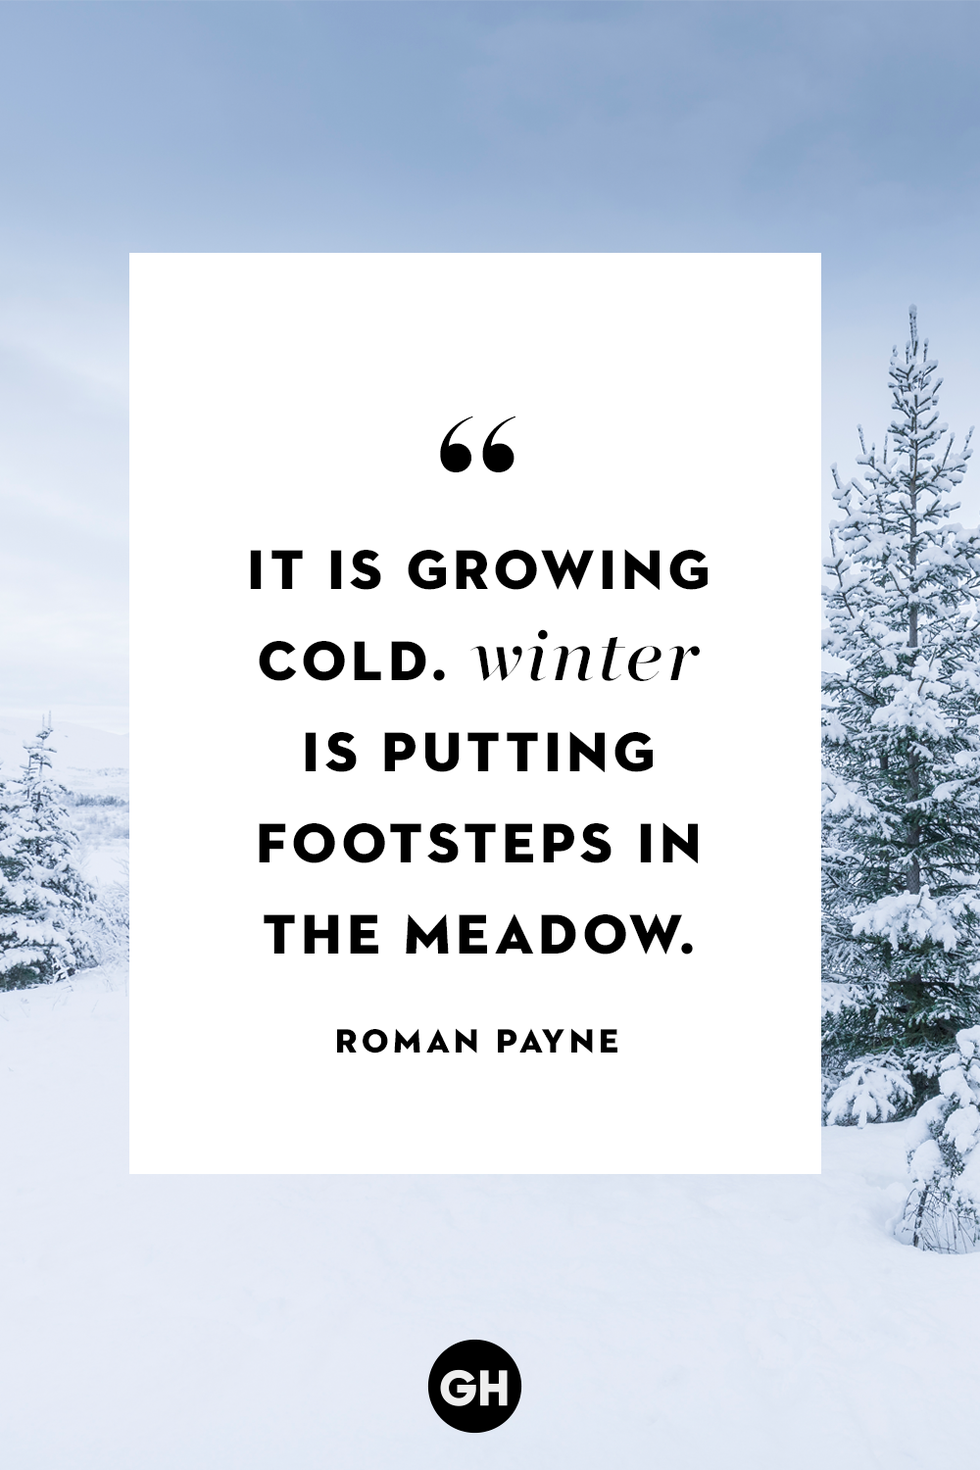 38 Best Winter Quotes - Short and Cute Quotes to Welcome Winter